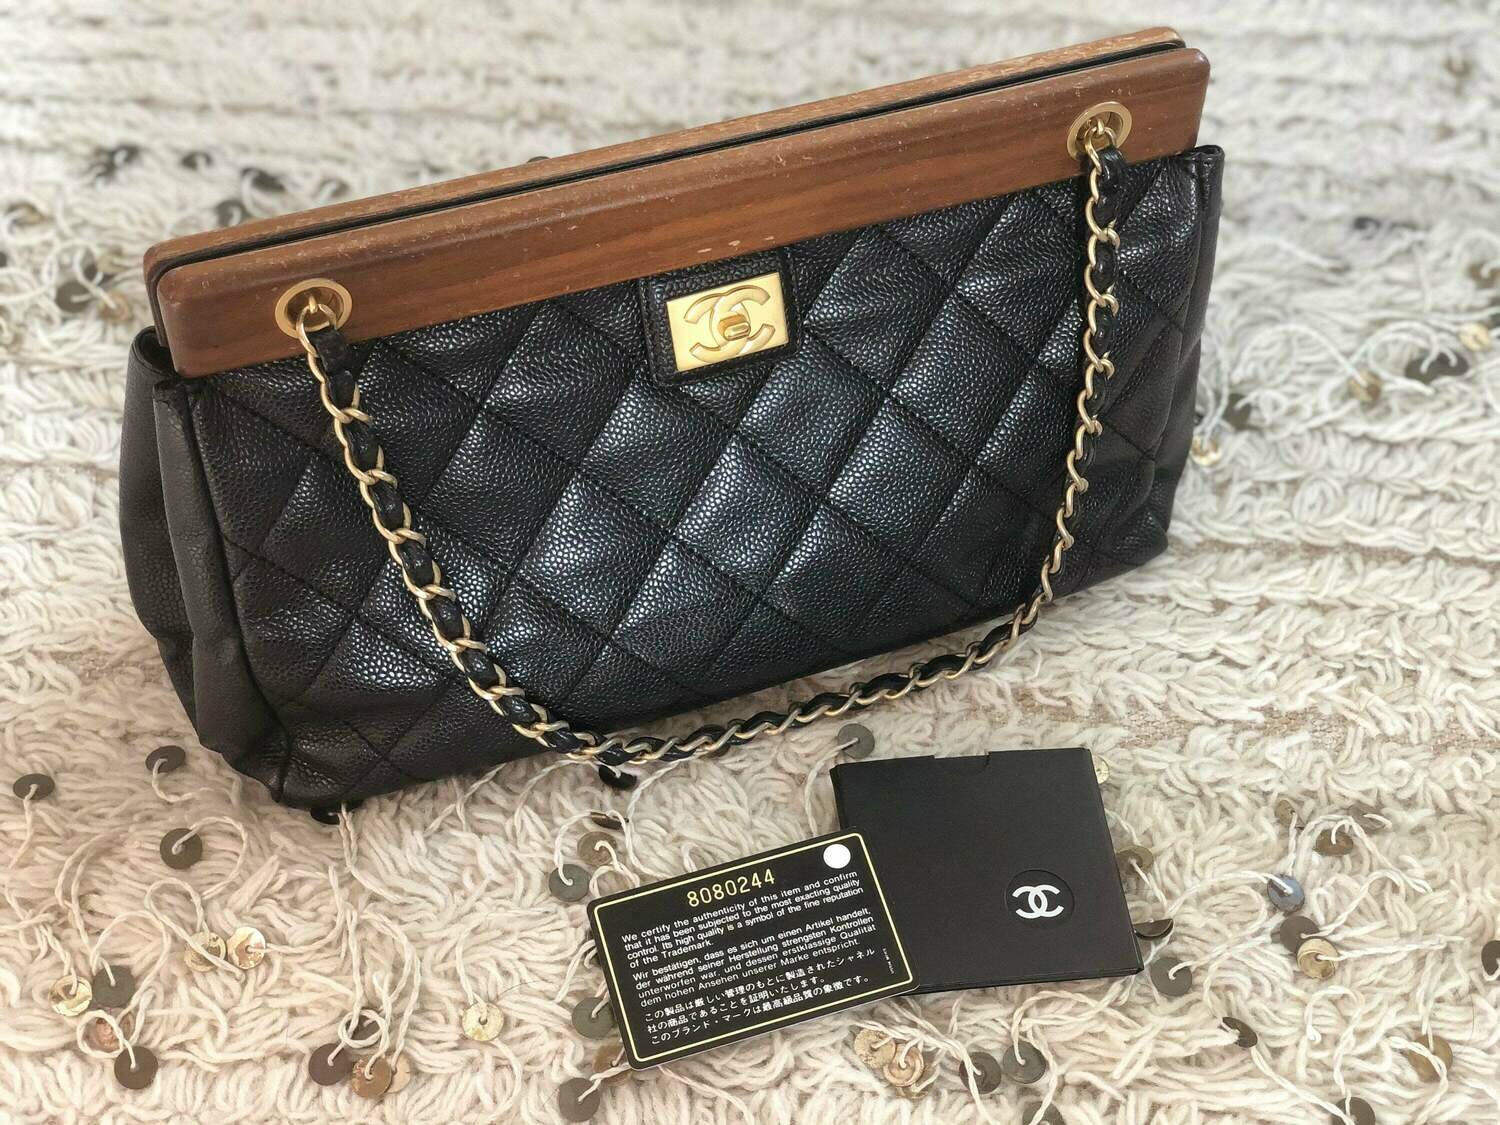 Classic Quilted Matelasse CC Logo Caviar Leather (Authentic Pre-Owned) –  The Lady Bag